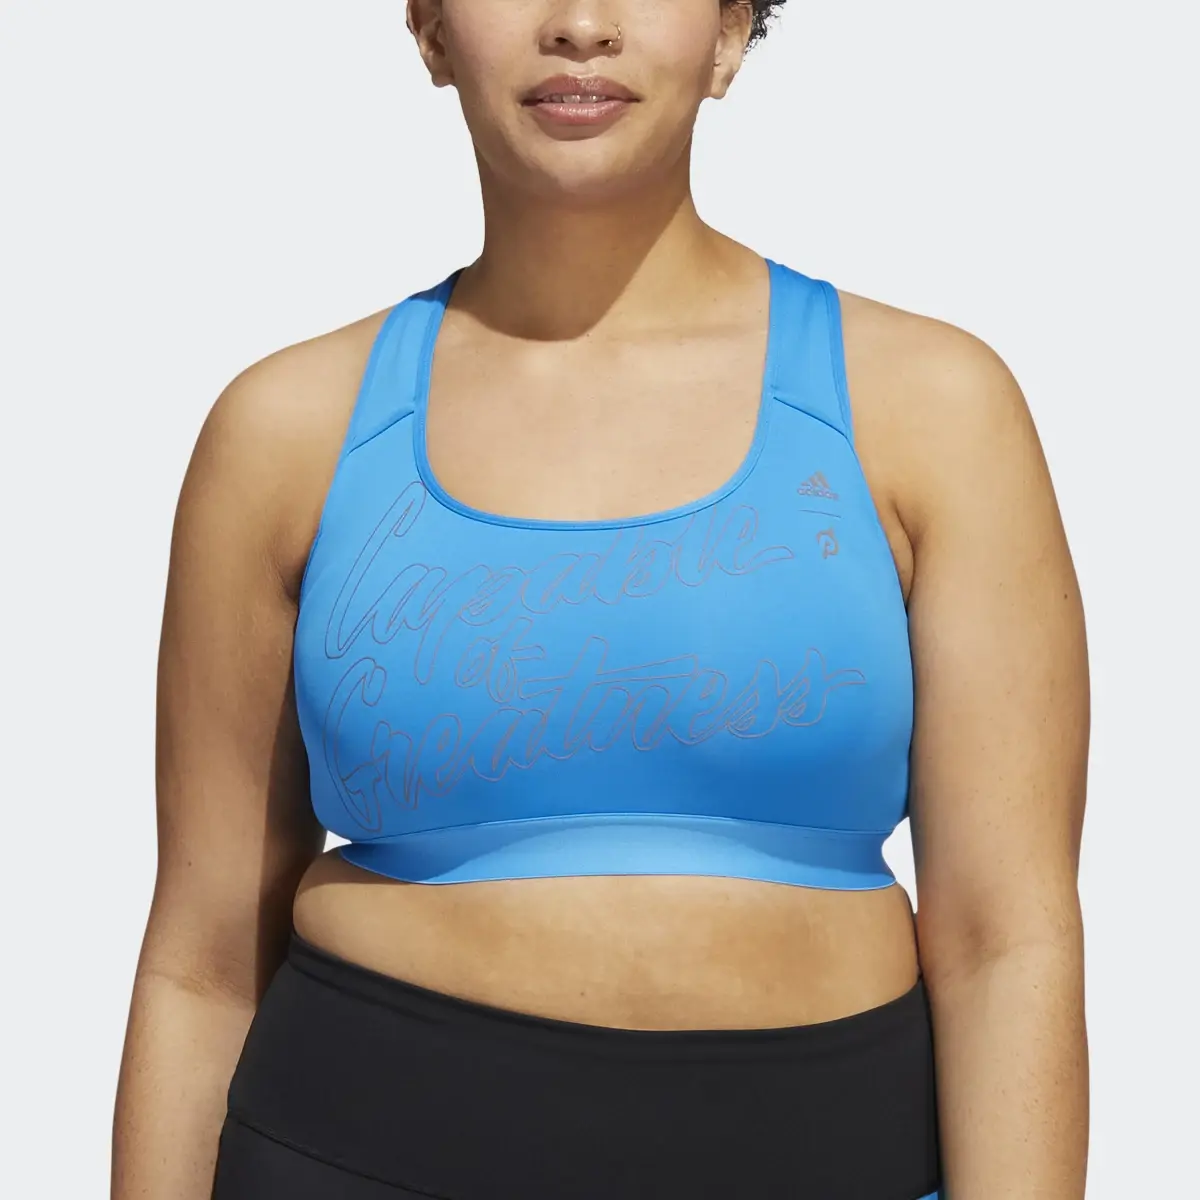 Adidas Capable of Greatness Bra (Plus Size). 1